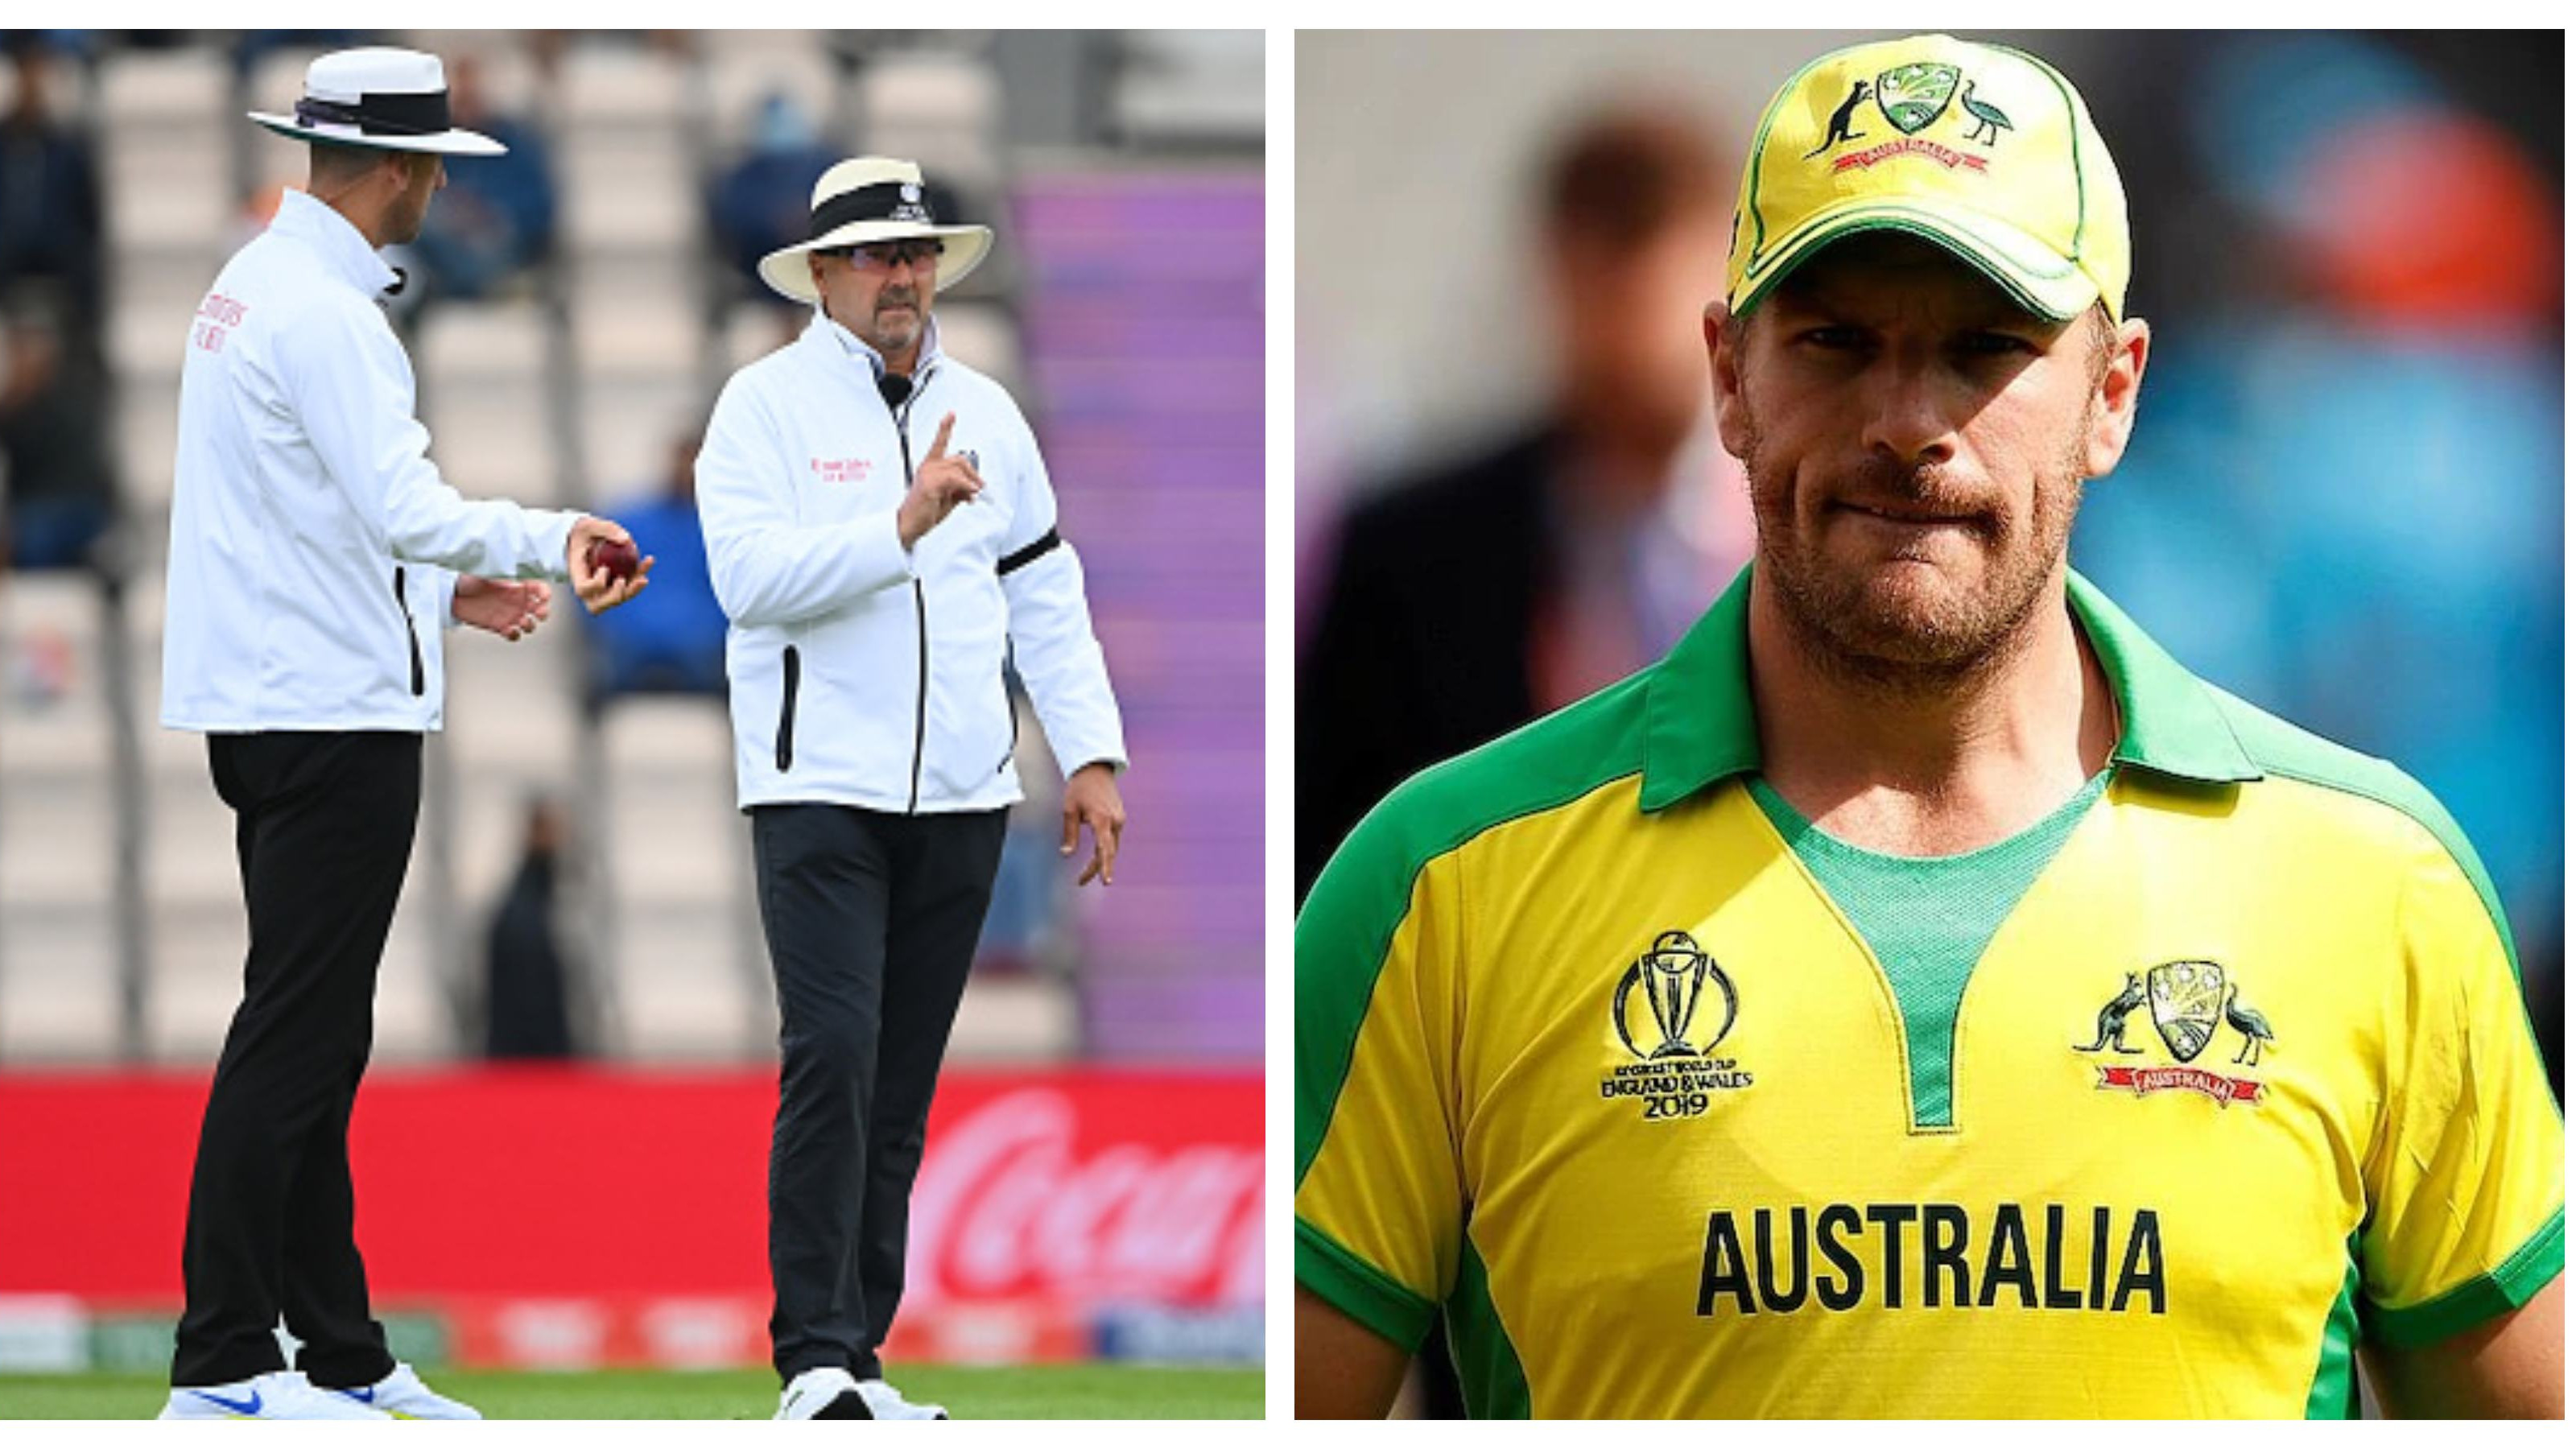 WTC 2021 Final: Aaron Finch questions ICC’s decision to hand 3 reviews to both teams despite neutral umpires